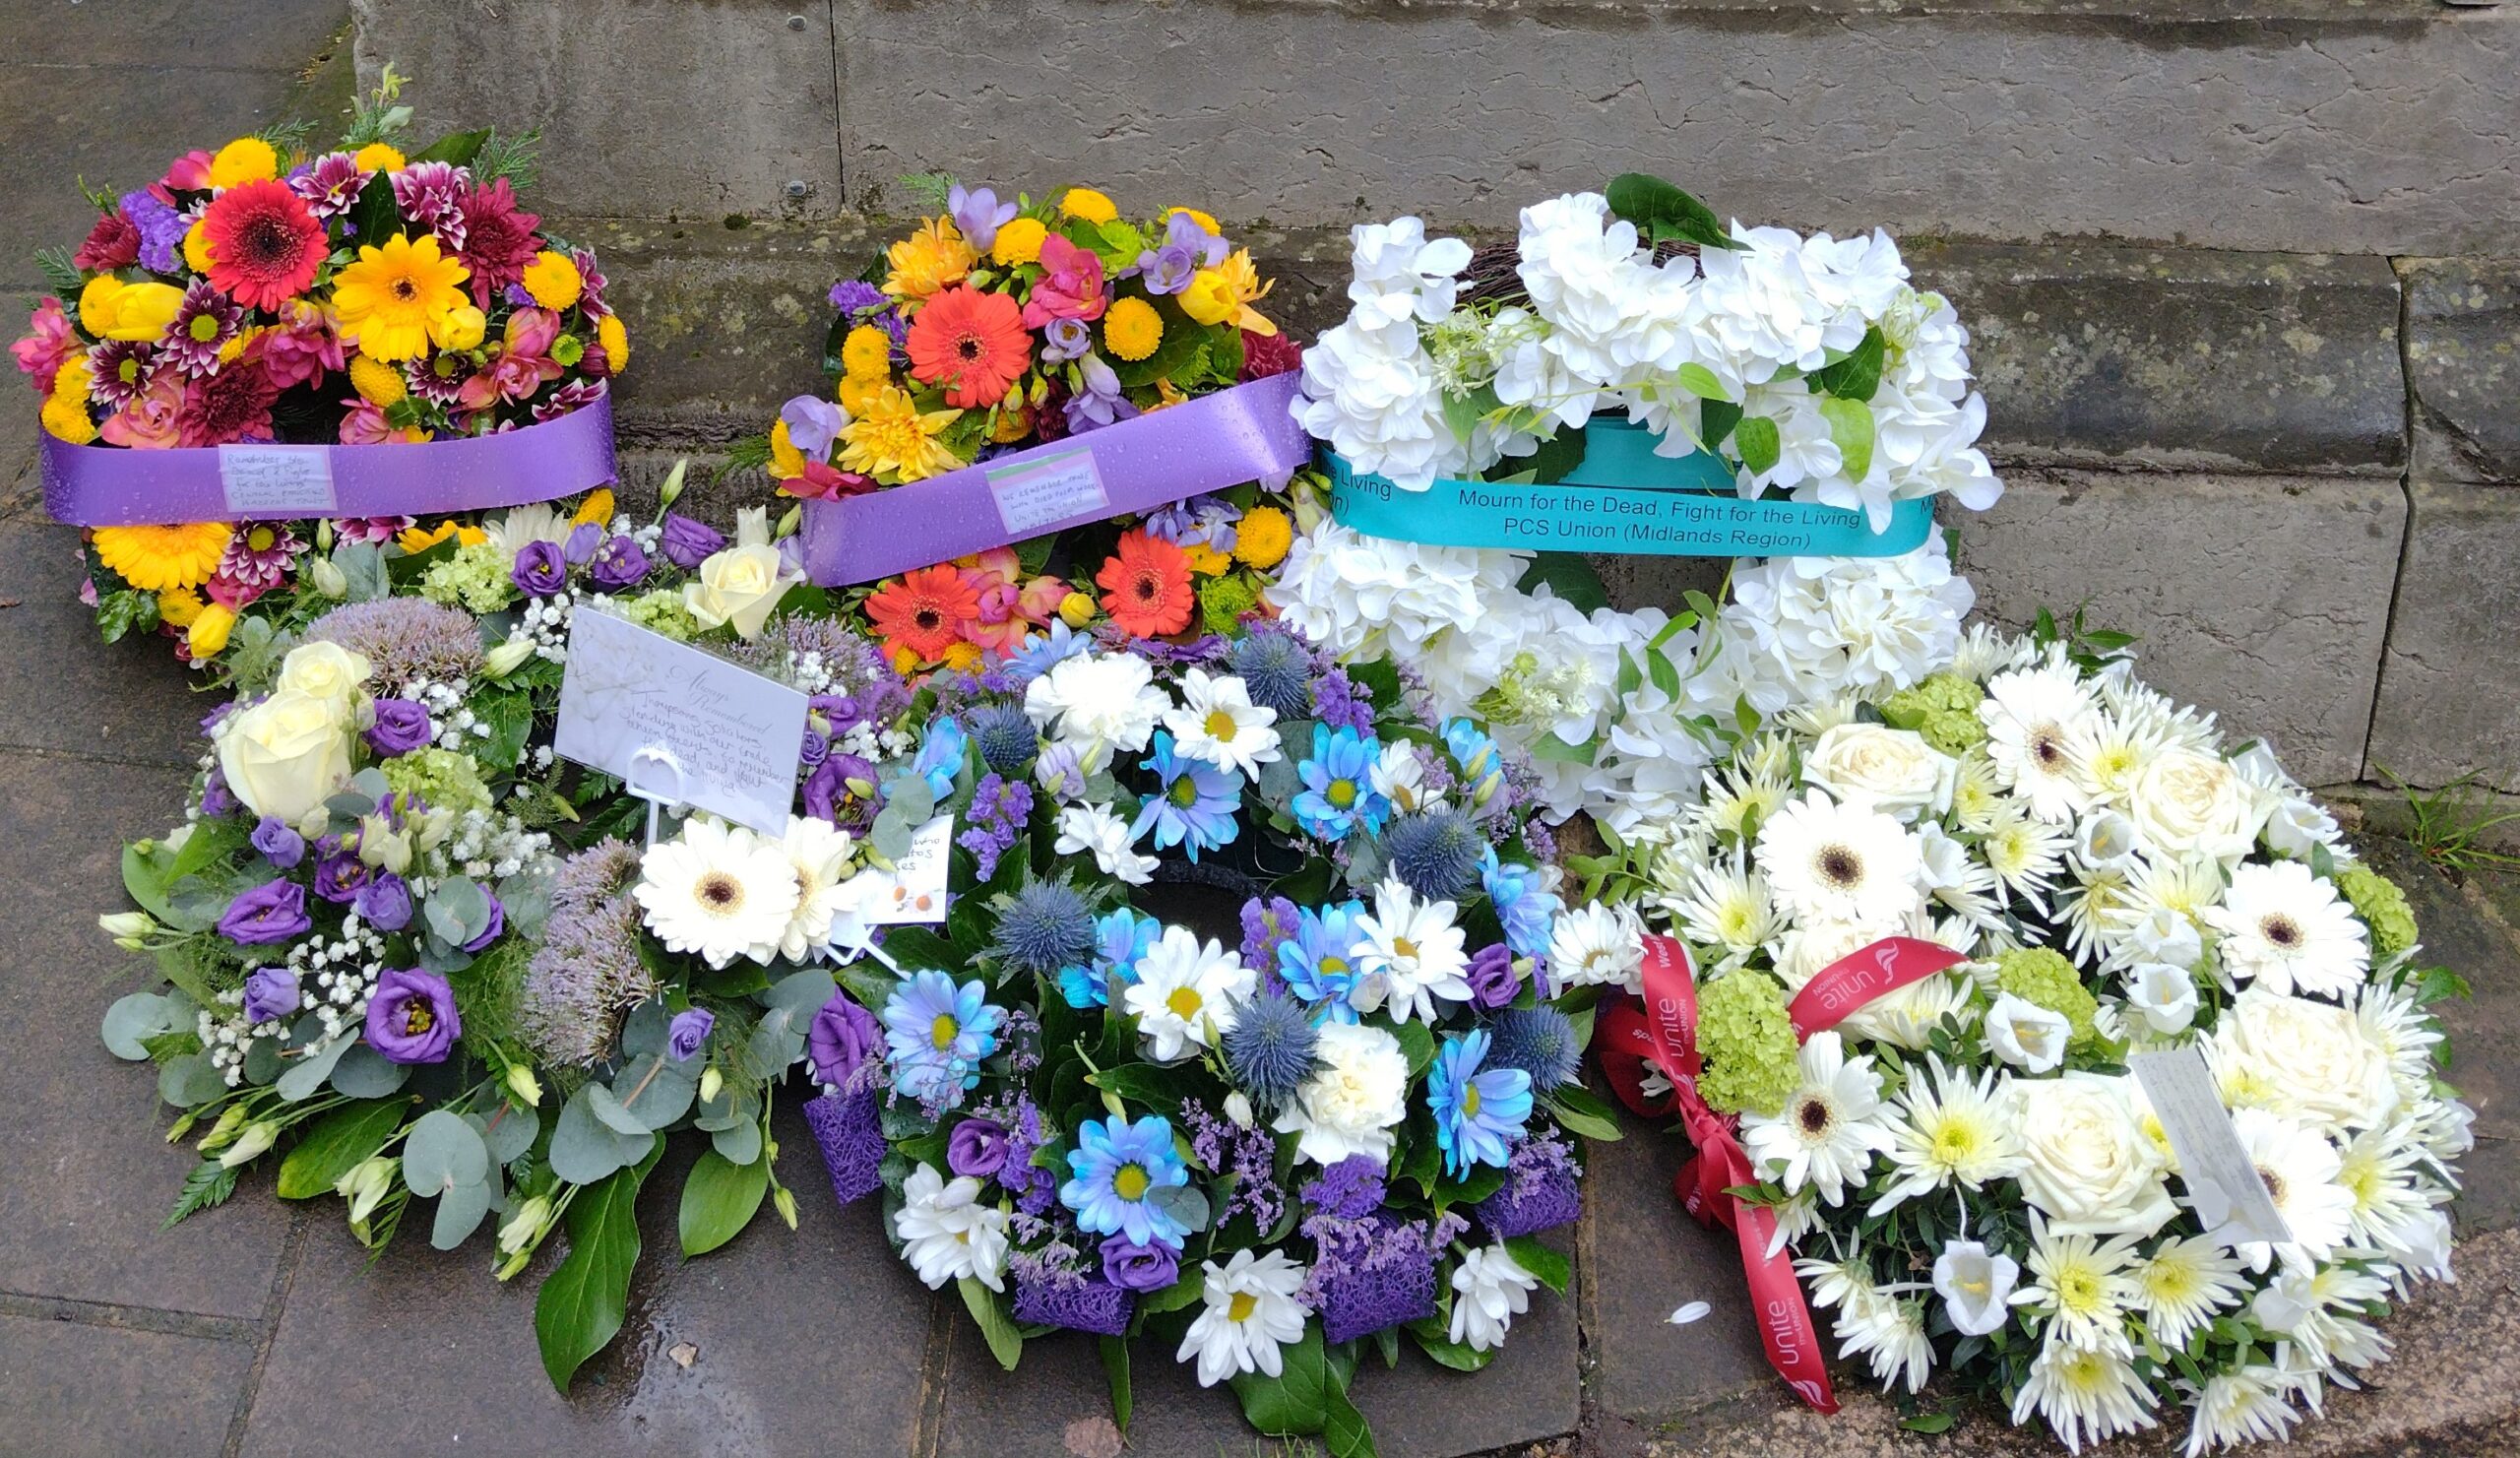 The wreaths laid at this year's International Workers' Memorial Day event in Birmingham.